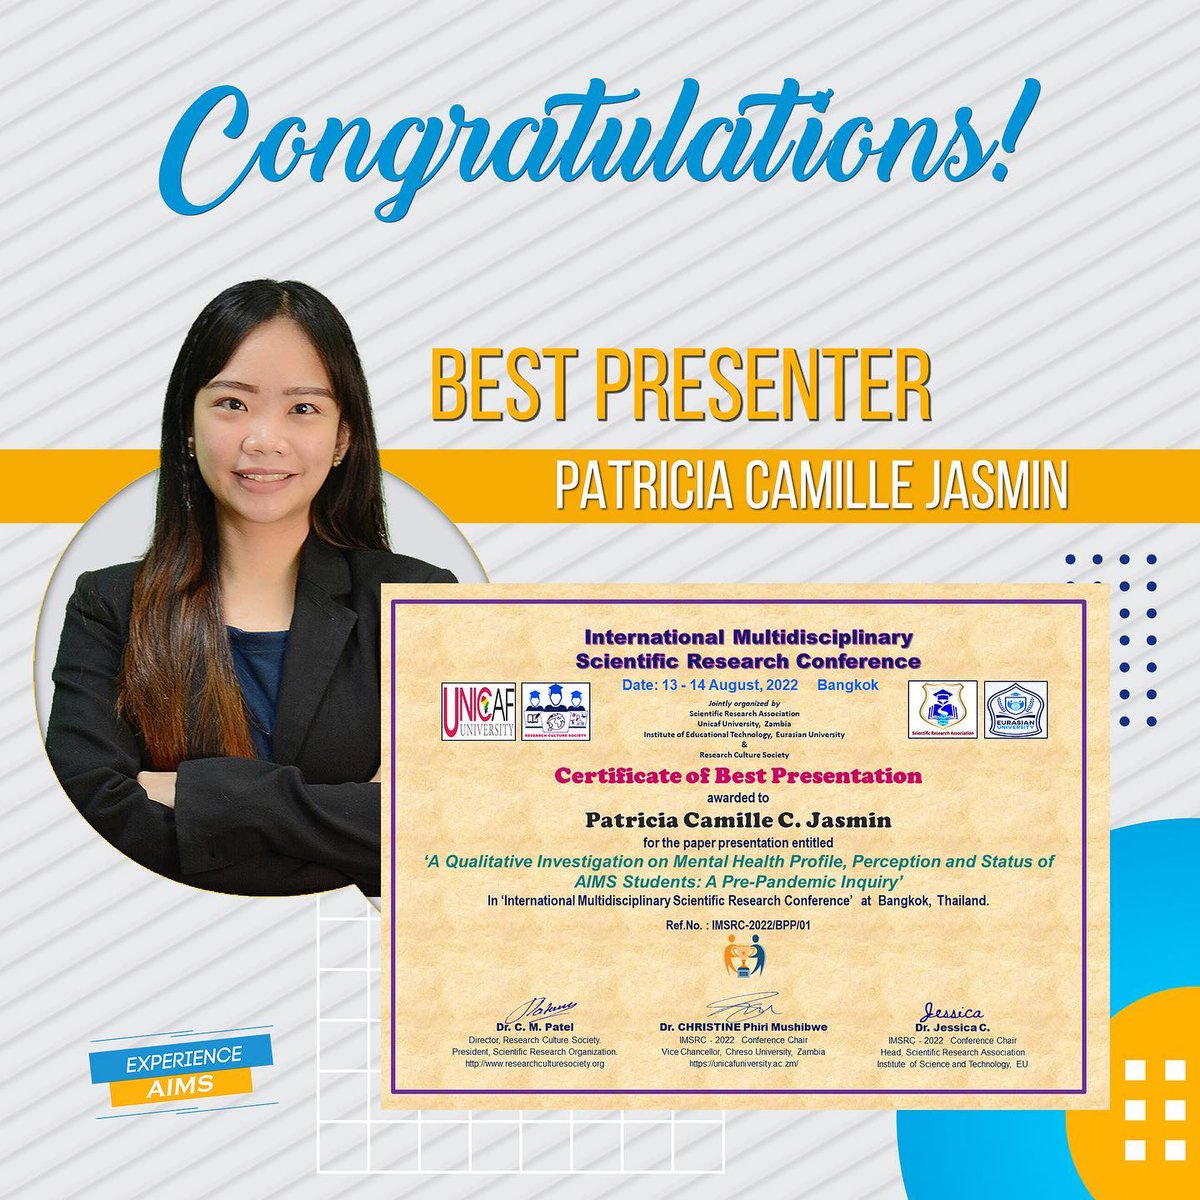 Congratulations Ms. Patricia Camille Jasmin! AIMS is proud of your achievement.

We are still accepting freshmen and transferees!

#AIMS #ExperienceAIMS #AIMSyan
#WeAreAIMS #AIMSpowered #TatakAIMS
Achievement • Integrity • Mastery • Service